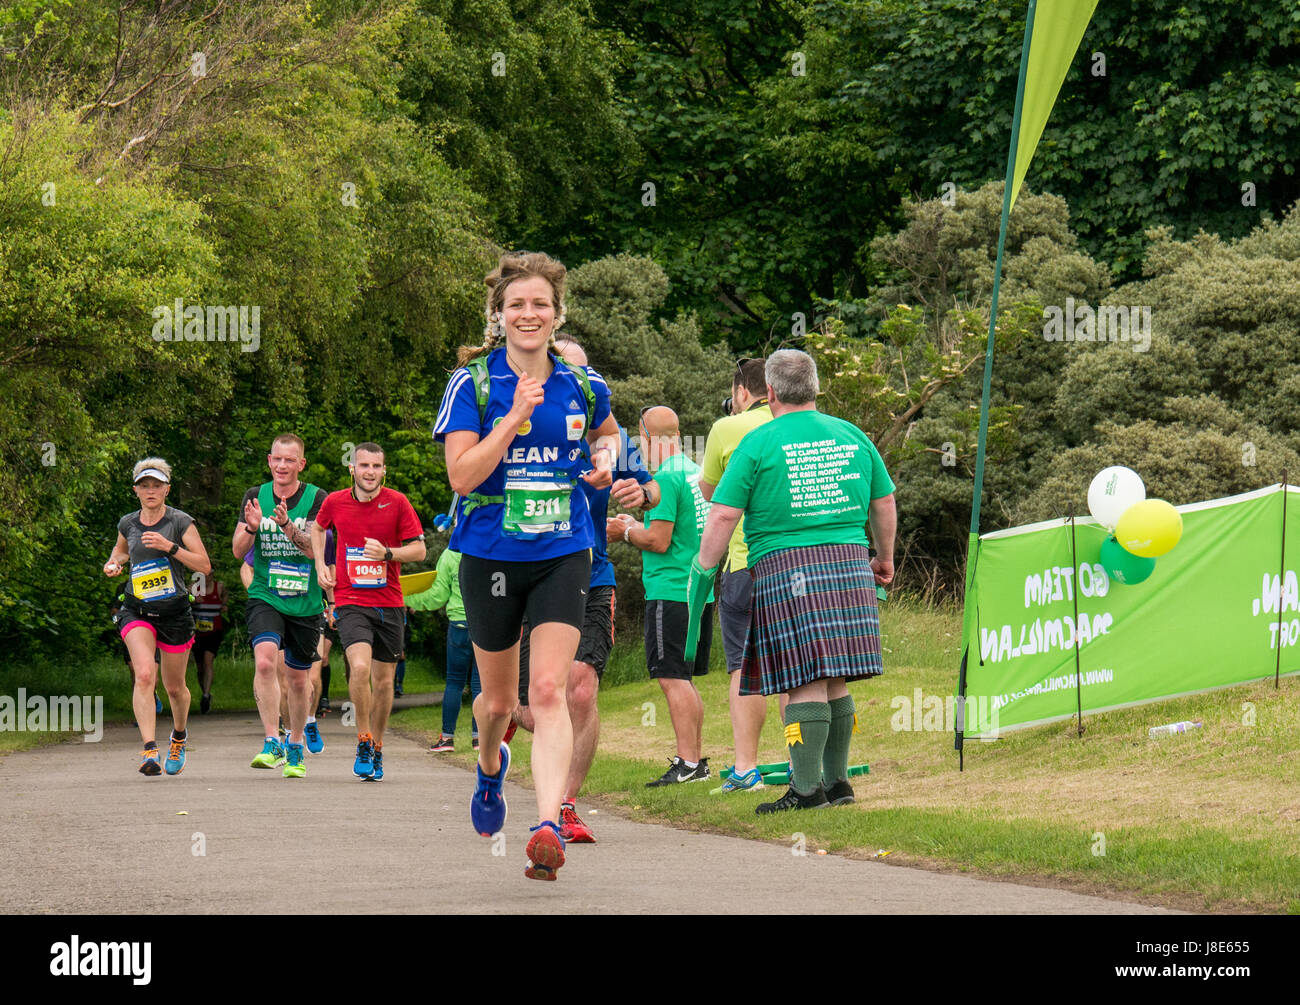 Gosford Estate, East Lothian, Scotland, UK. 28th May, 2017. A smiling female runner with blonde pigtails at Edinburgh Marathon Festival 2017 in Gosford Estate at Mile 18 Stock Photo